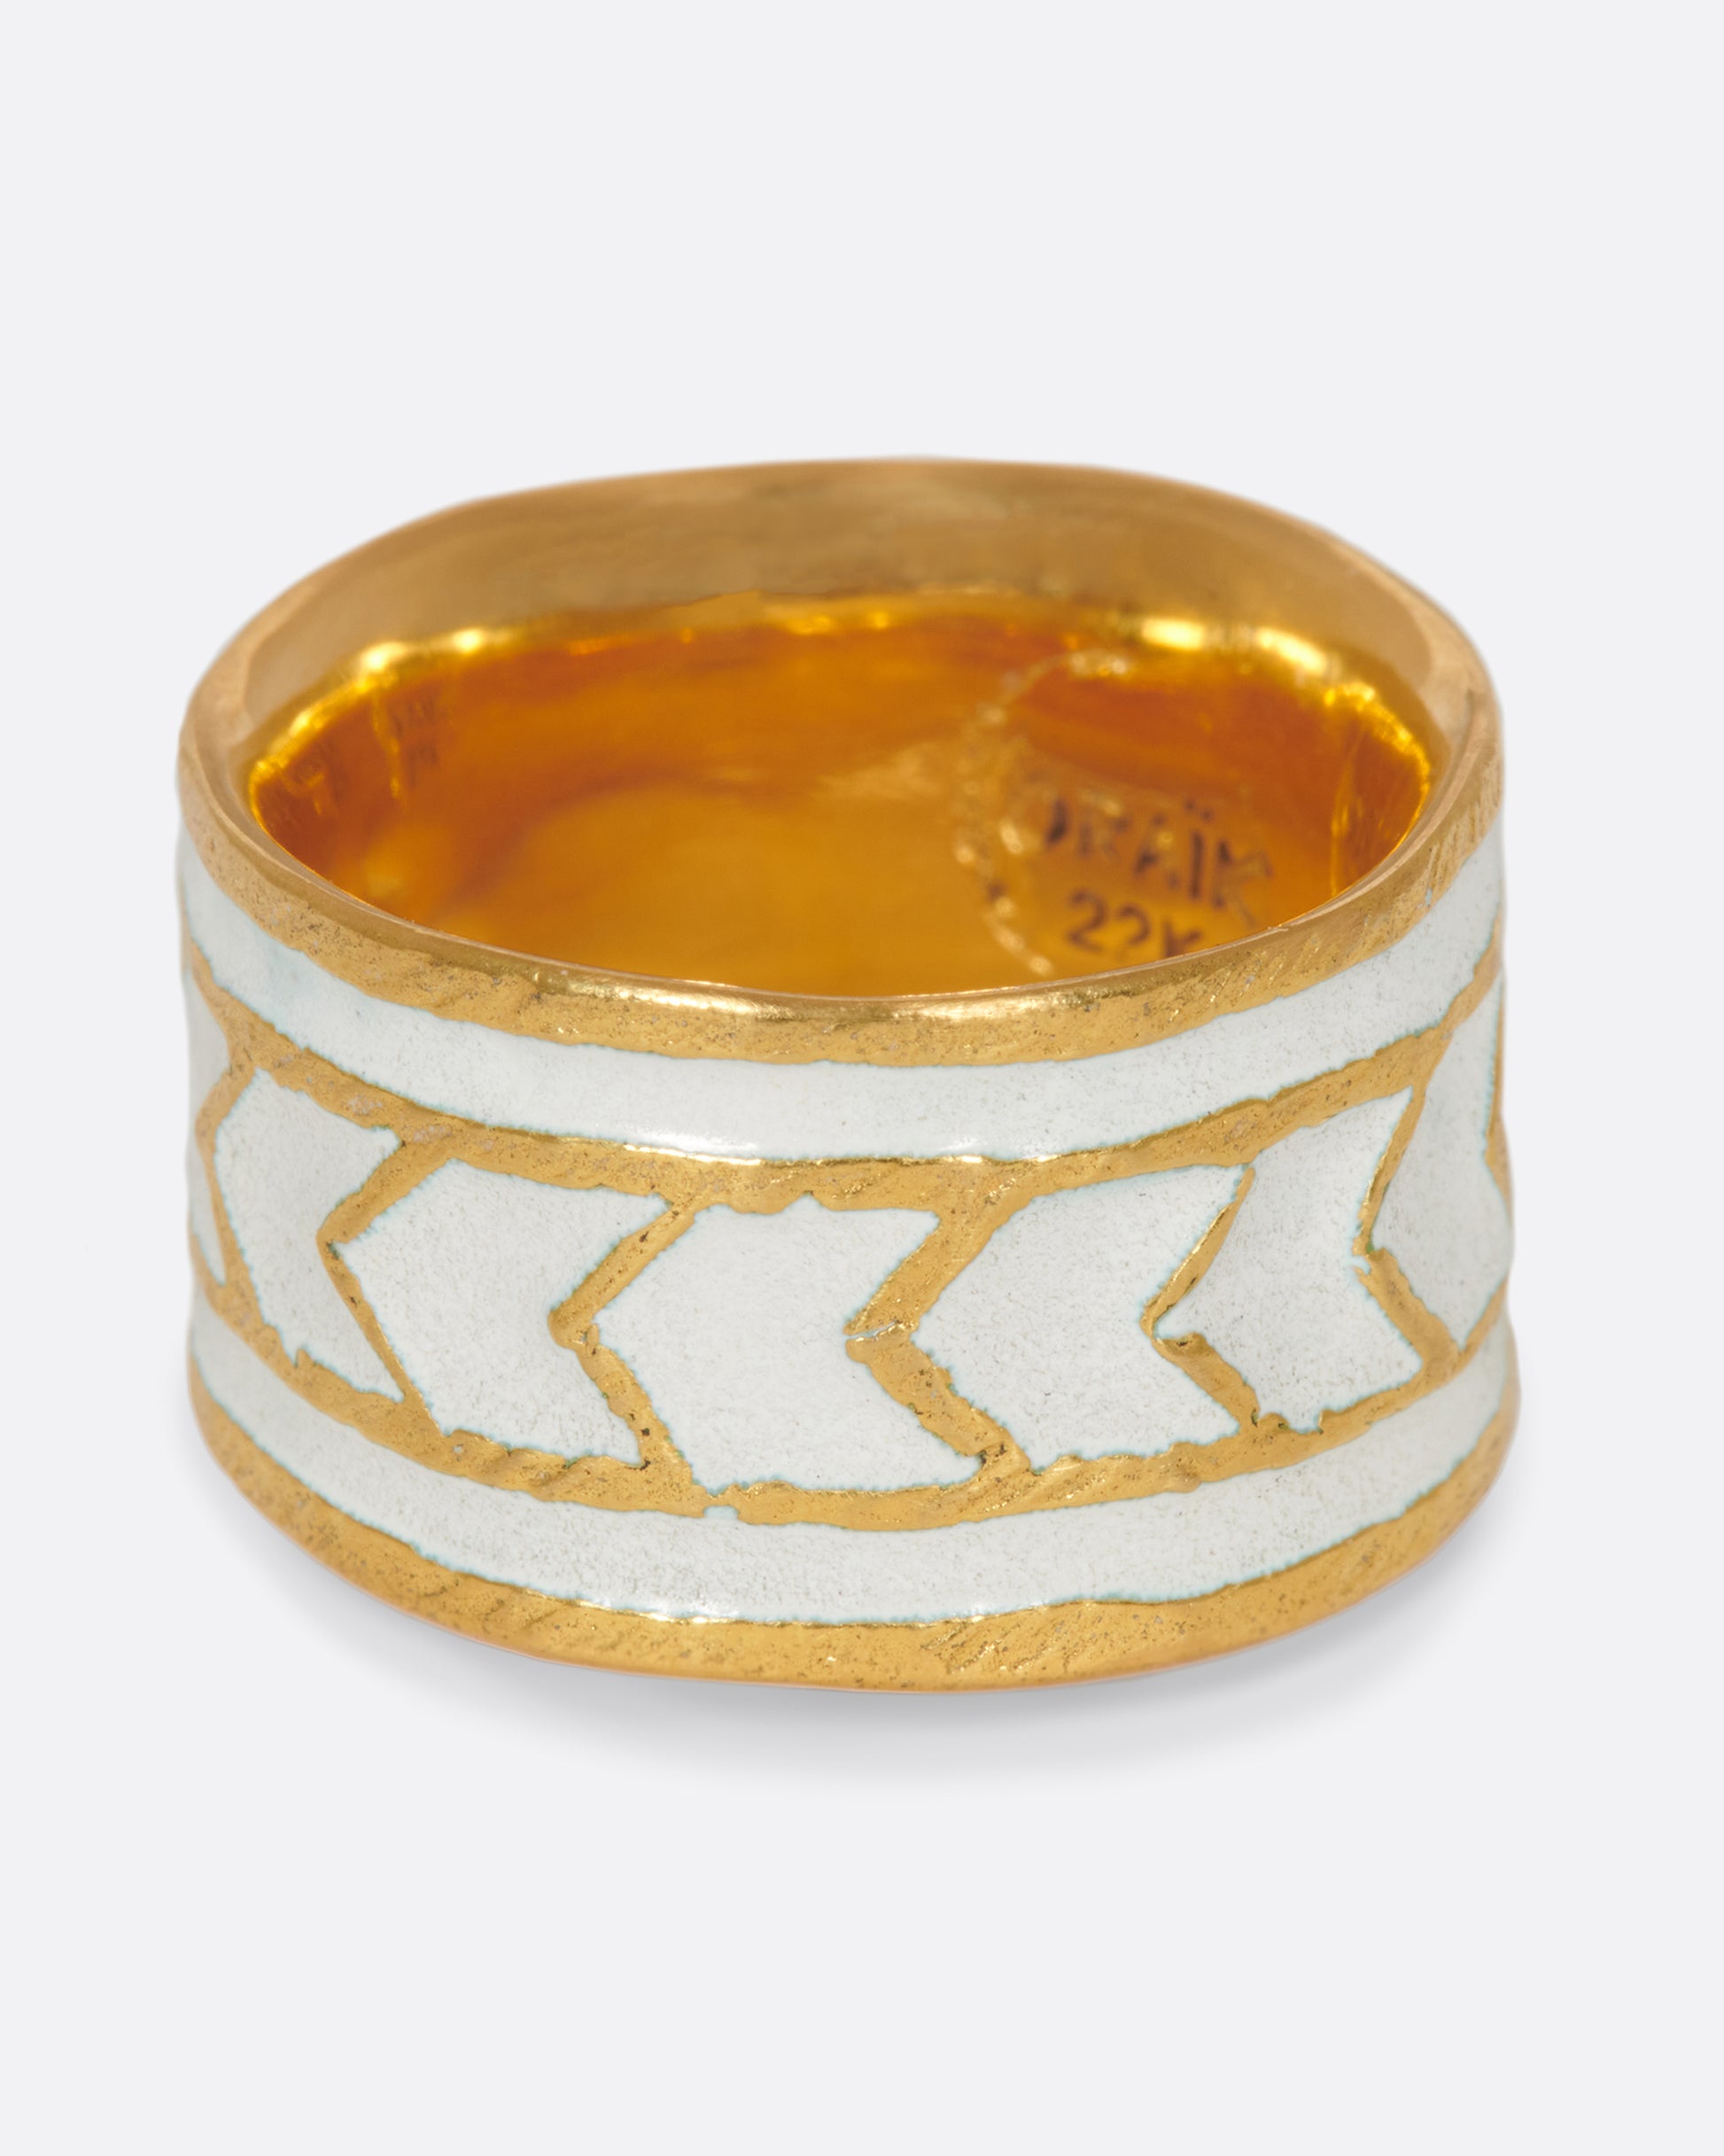 A handcrafted gold band with a path of consecutive arrows in white enamel.